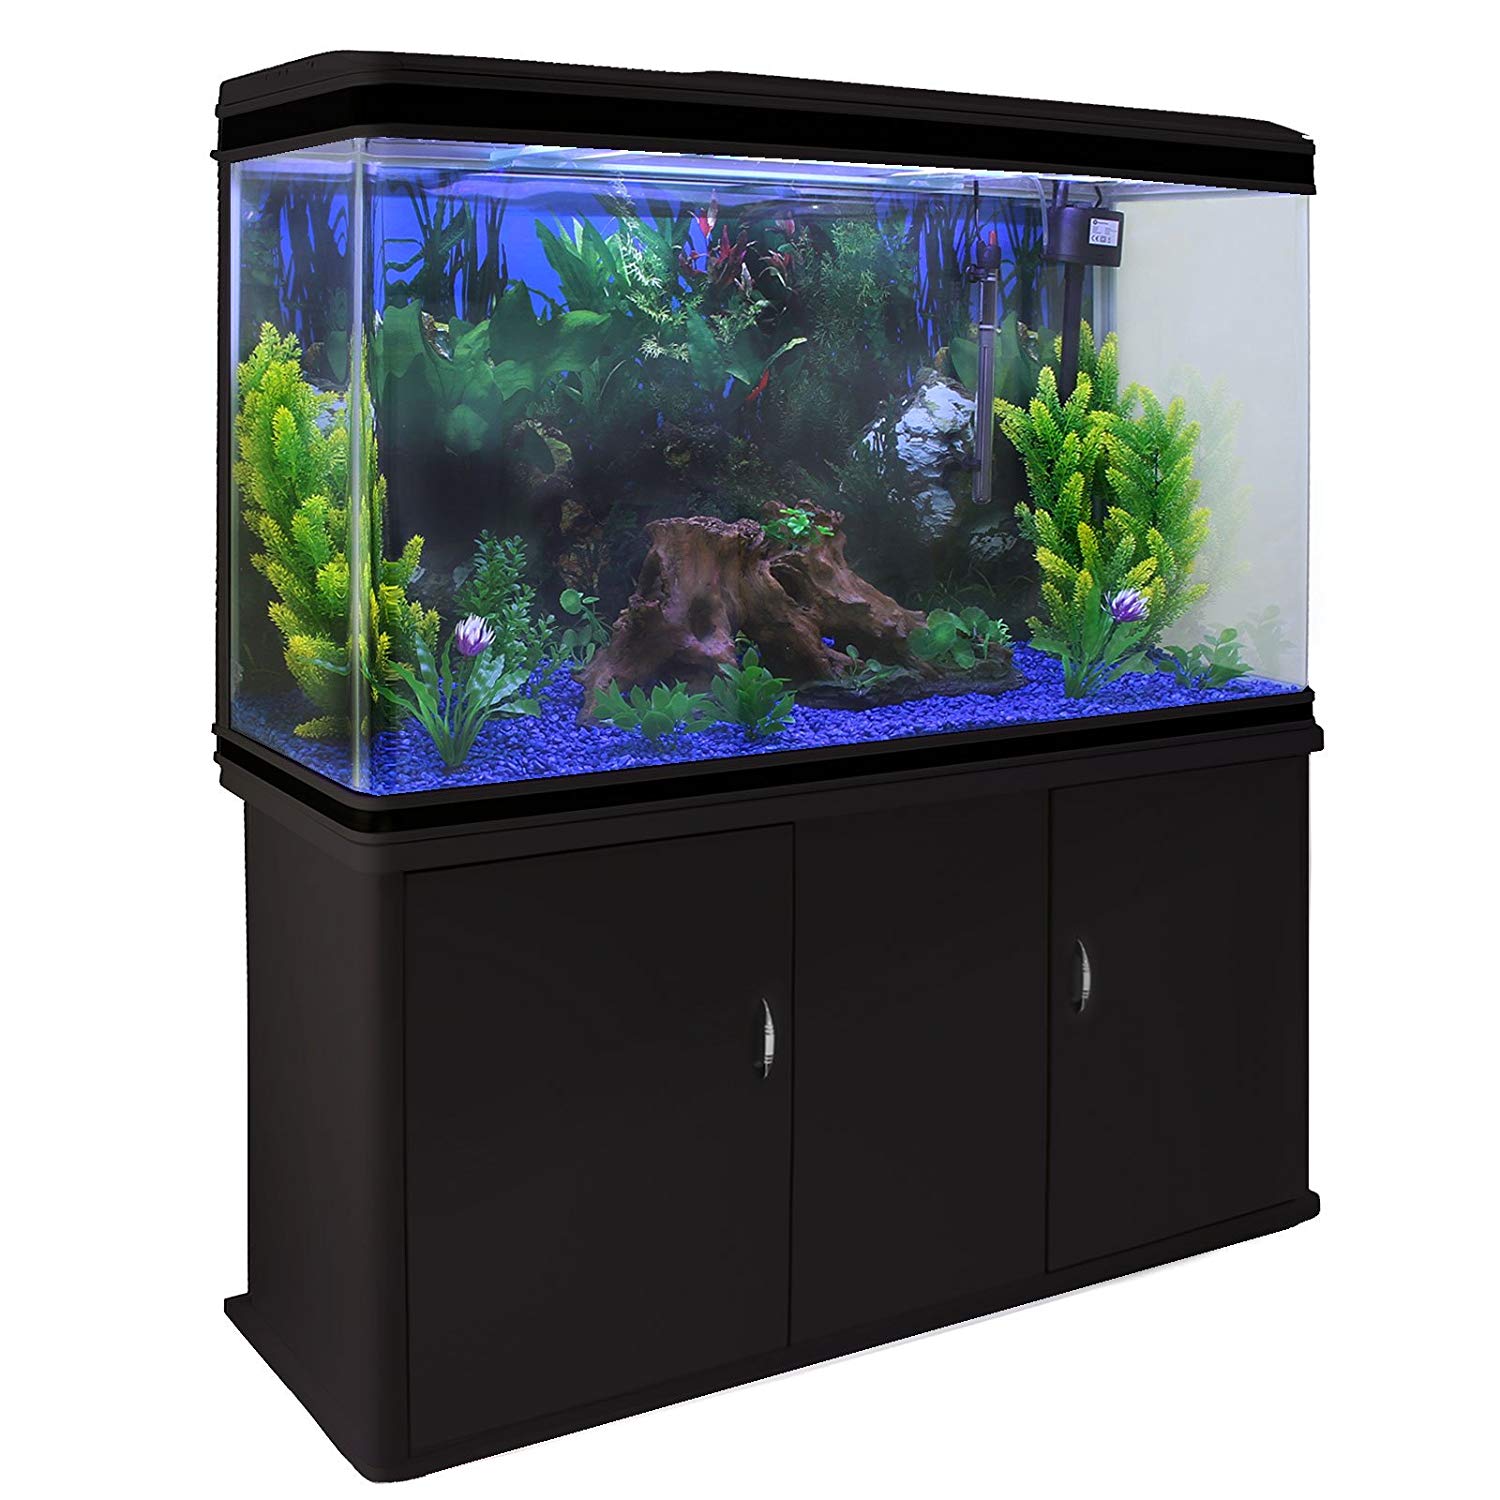 Best Tropical Fish For Cycling Tank Cycling fish tank: everything you need to know